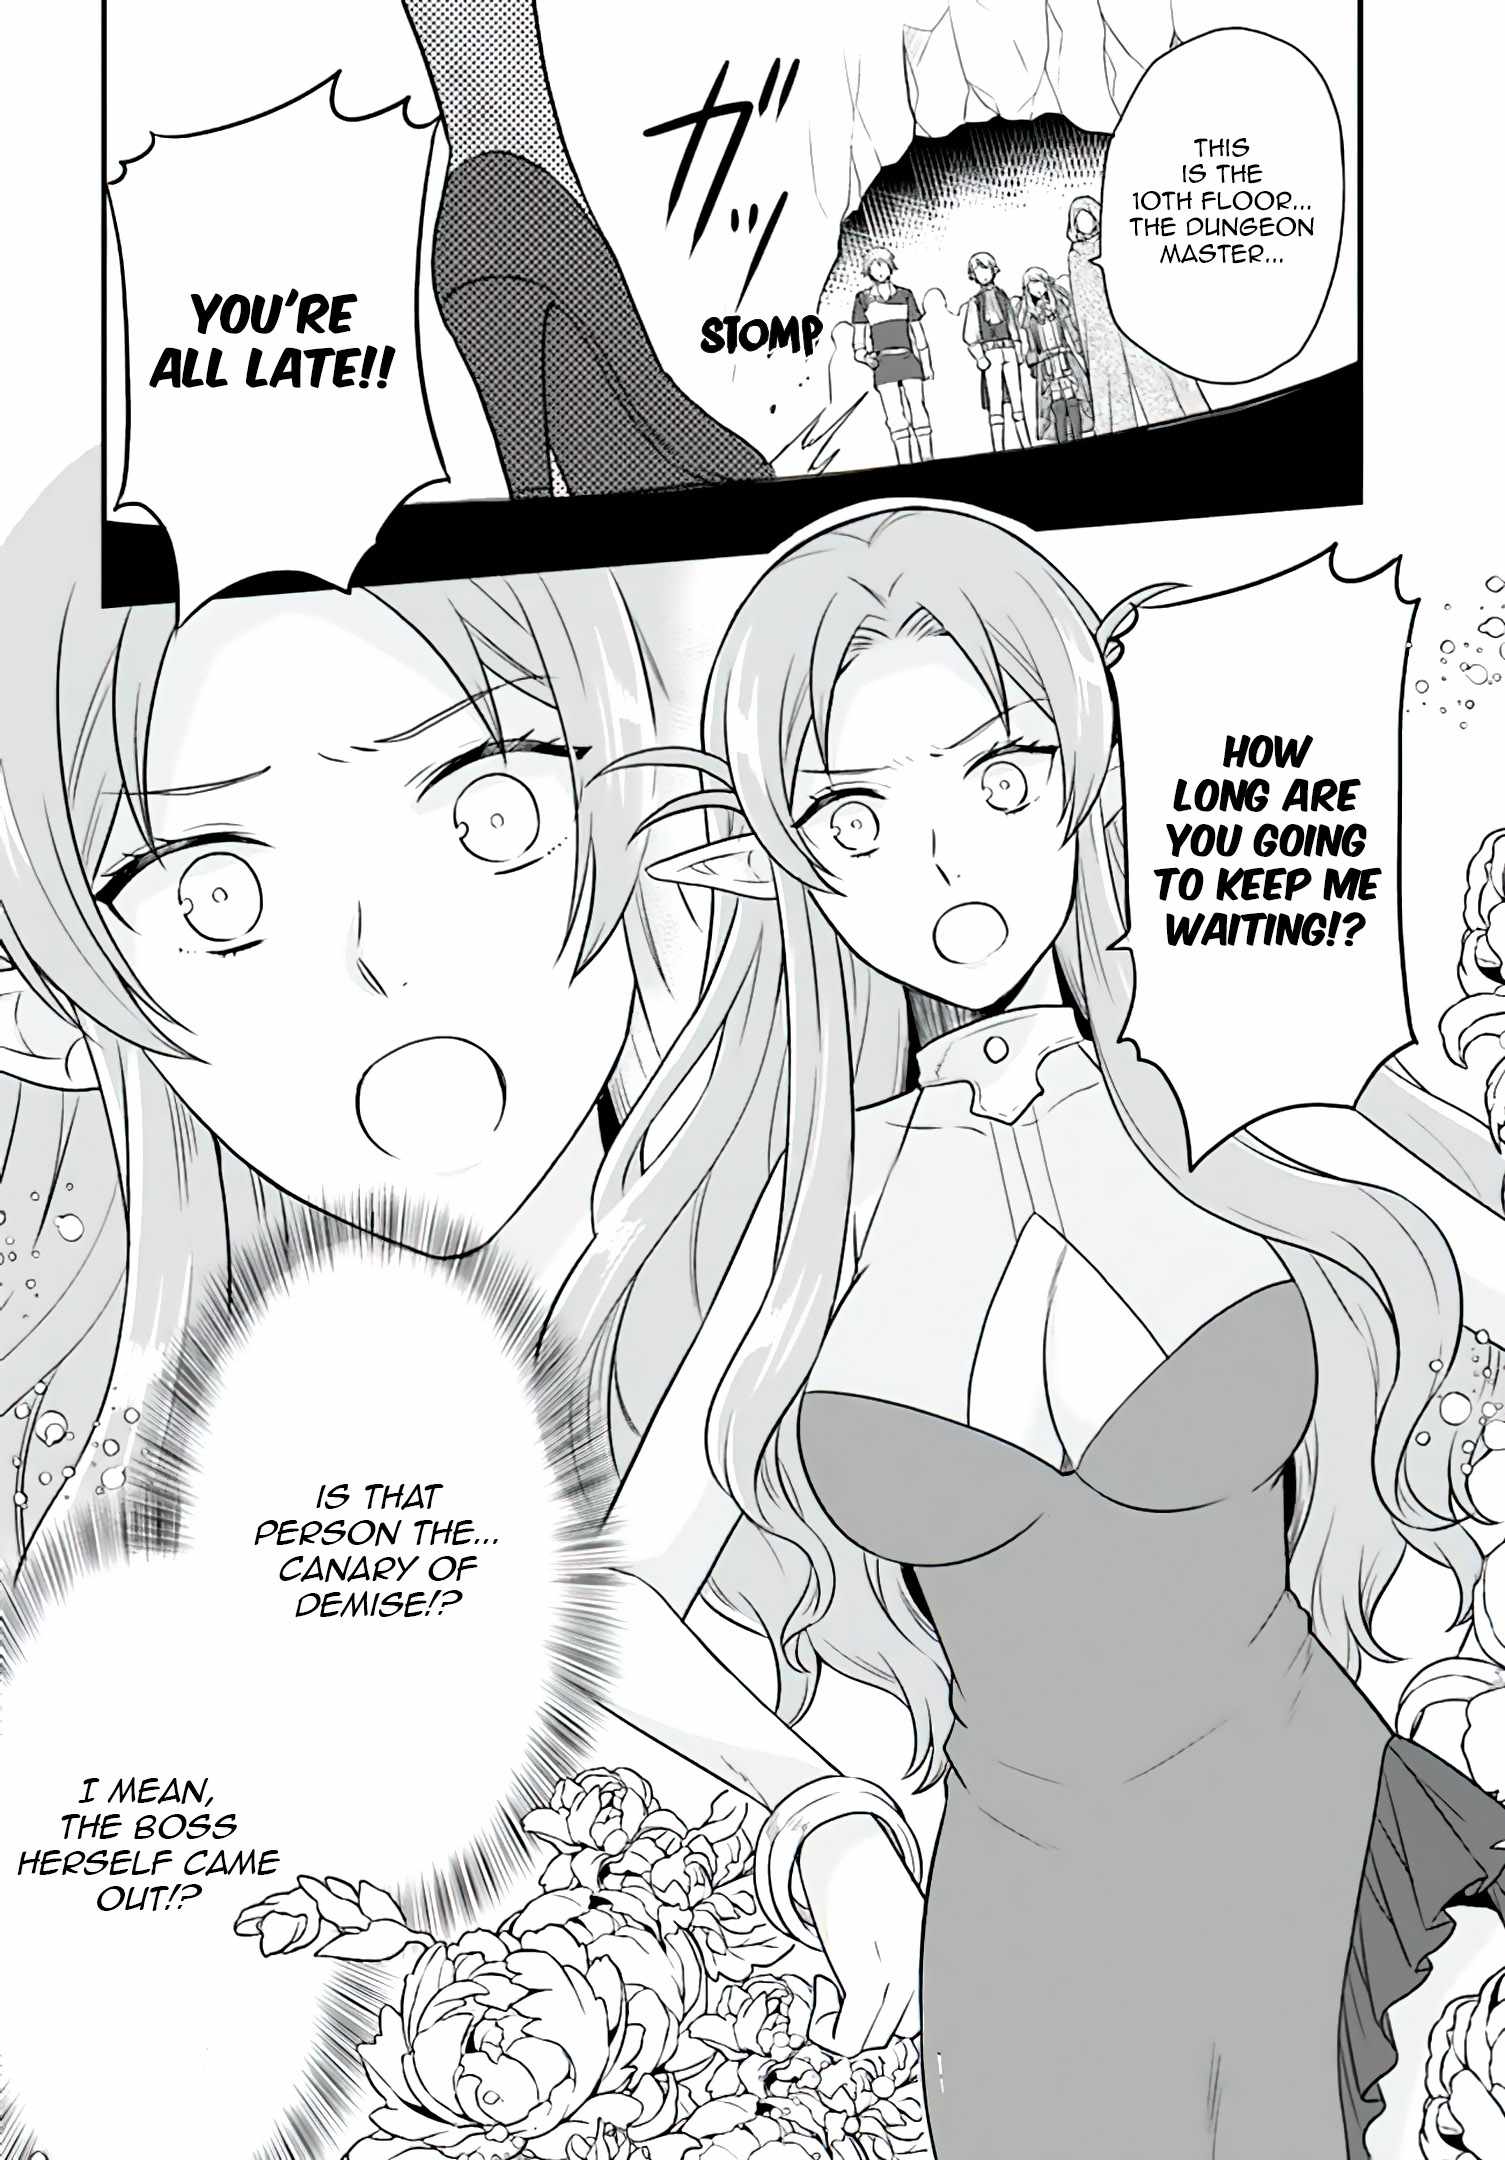 Because Of Her Love For Sake, The Otome Game Setting Was Broken And The Villainous Noblewoman Became The Noblewoman With Cheats - 18 page 9